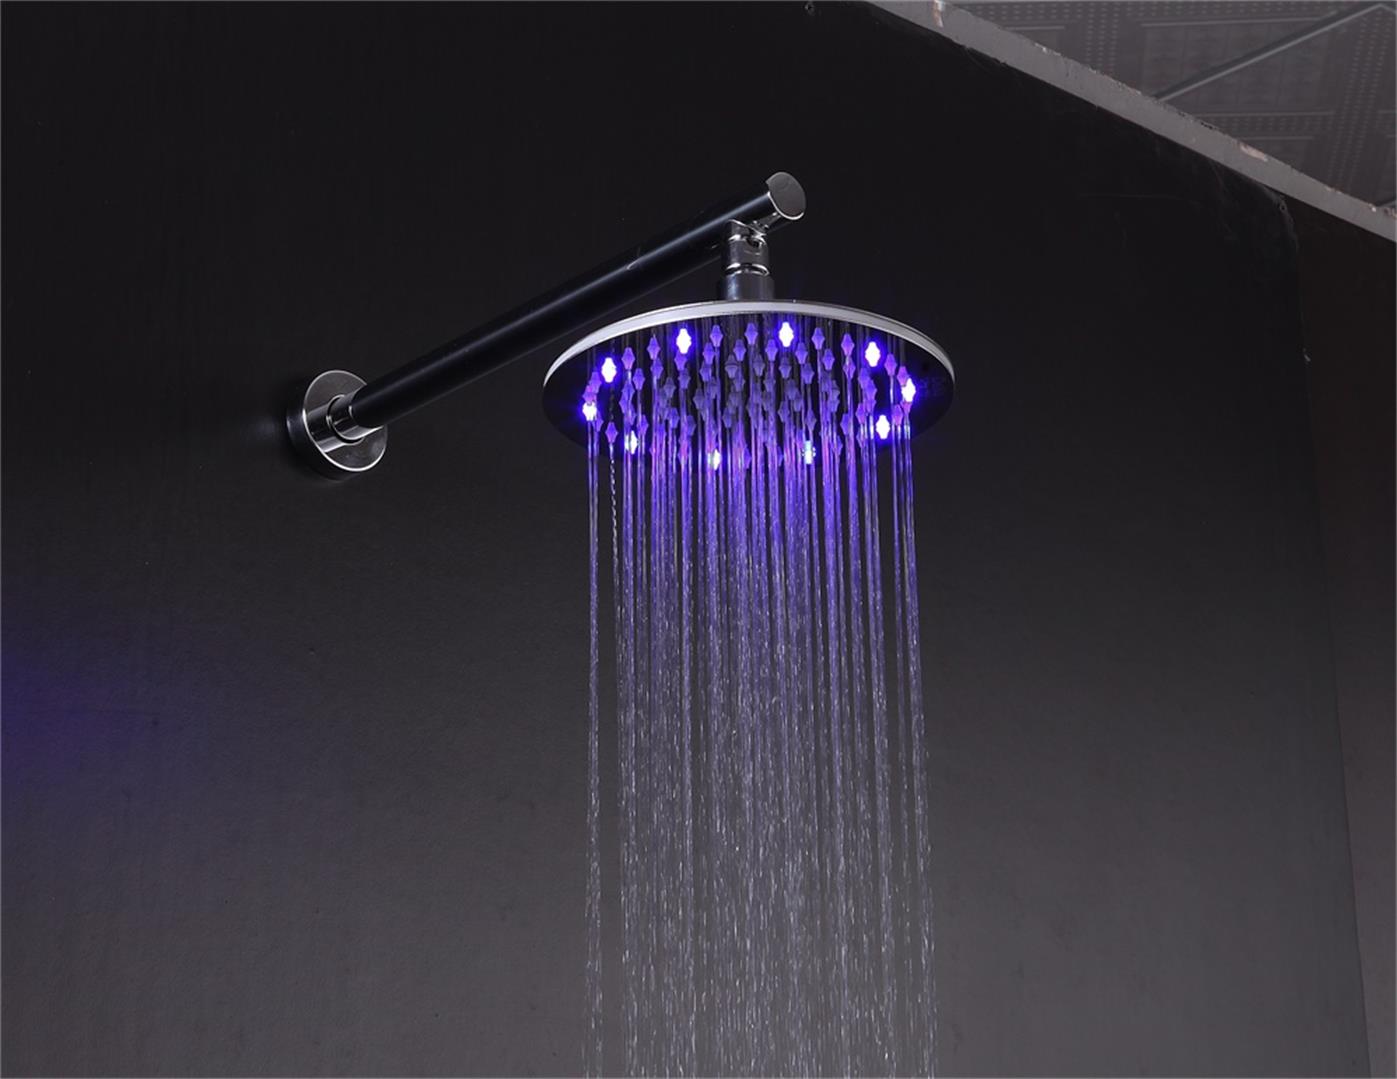 What’s The Keypoint For Selecting Rain Shower Head?